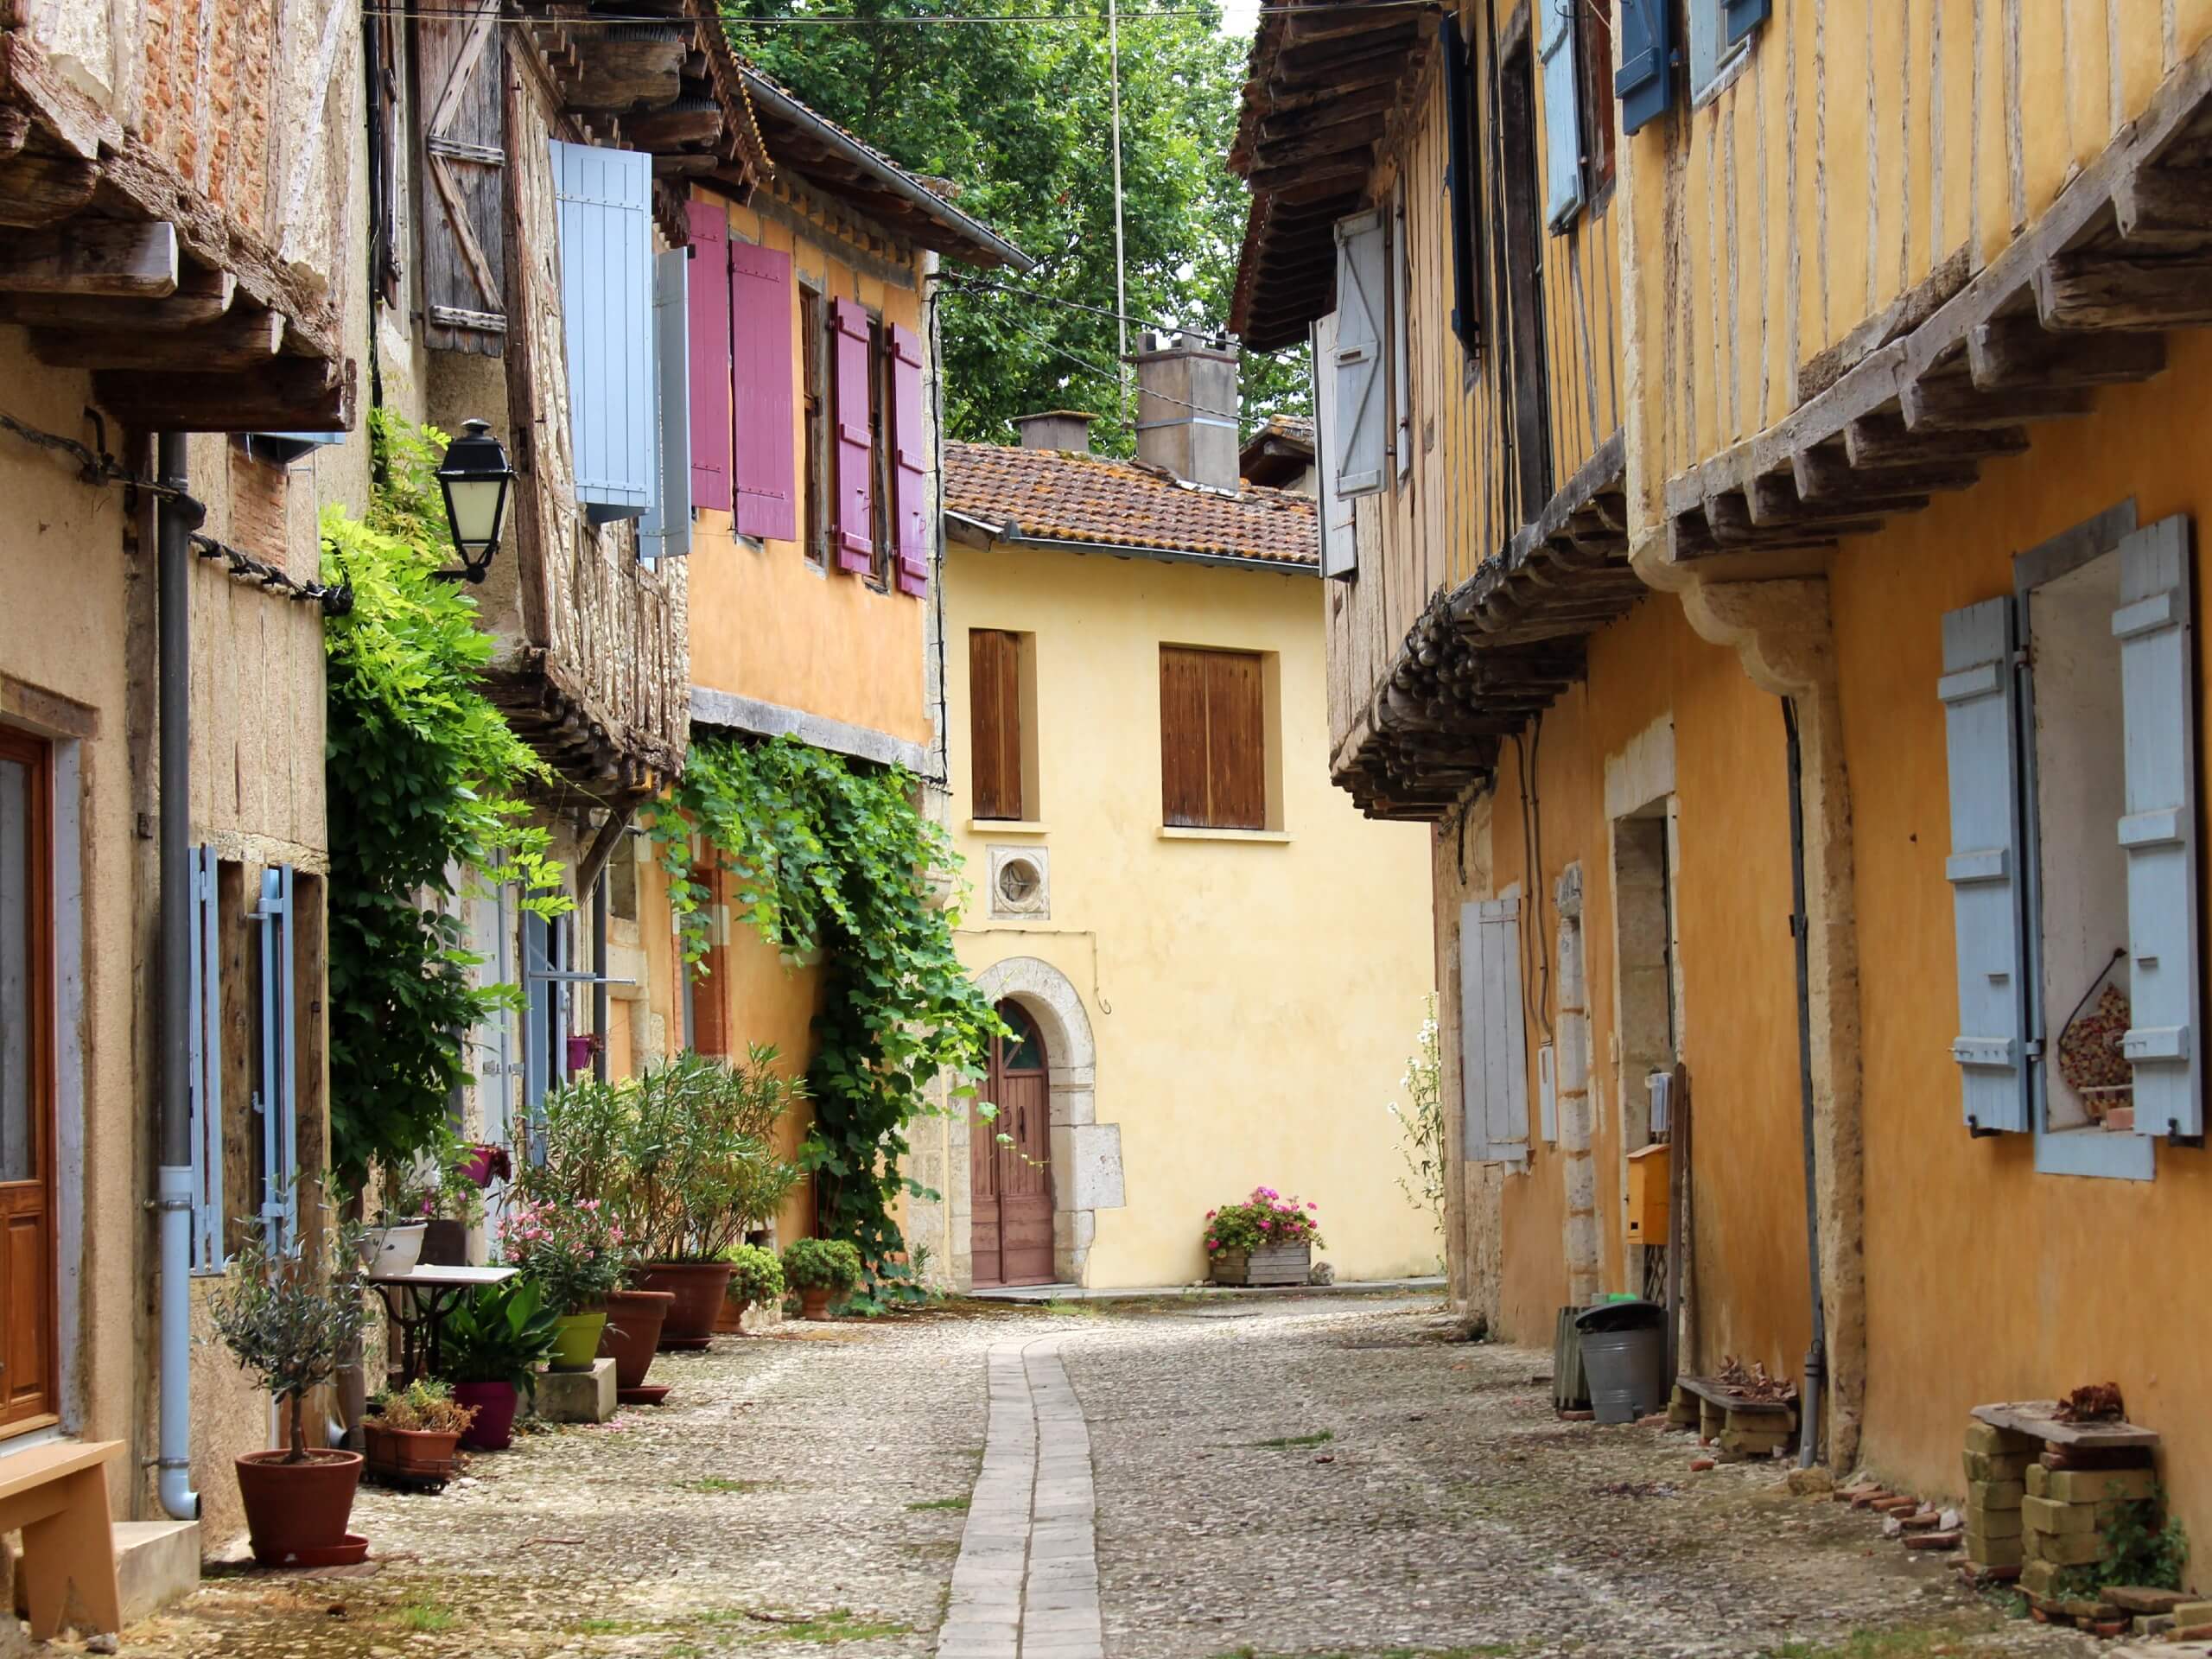 Small village in Occitanie, visited while walking the Camino Le Puy